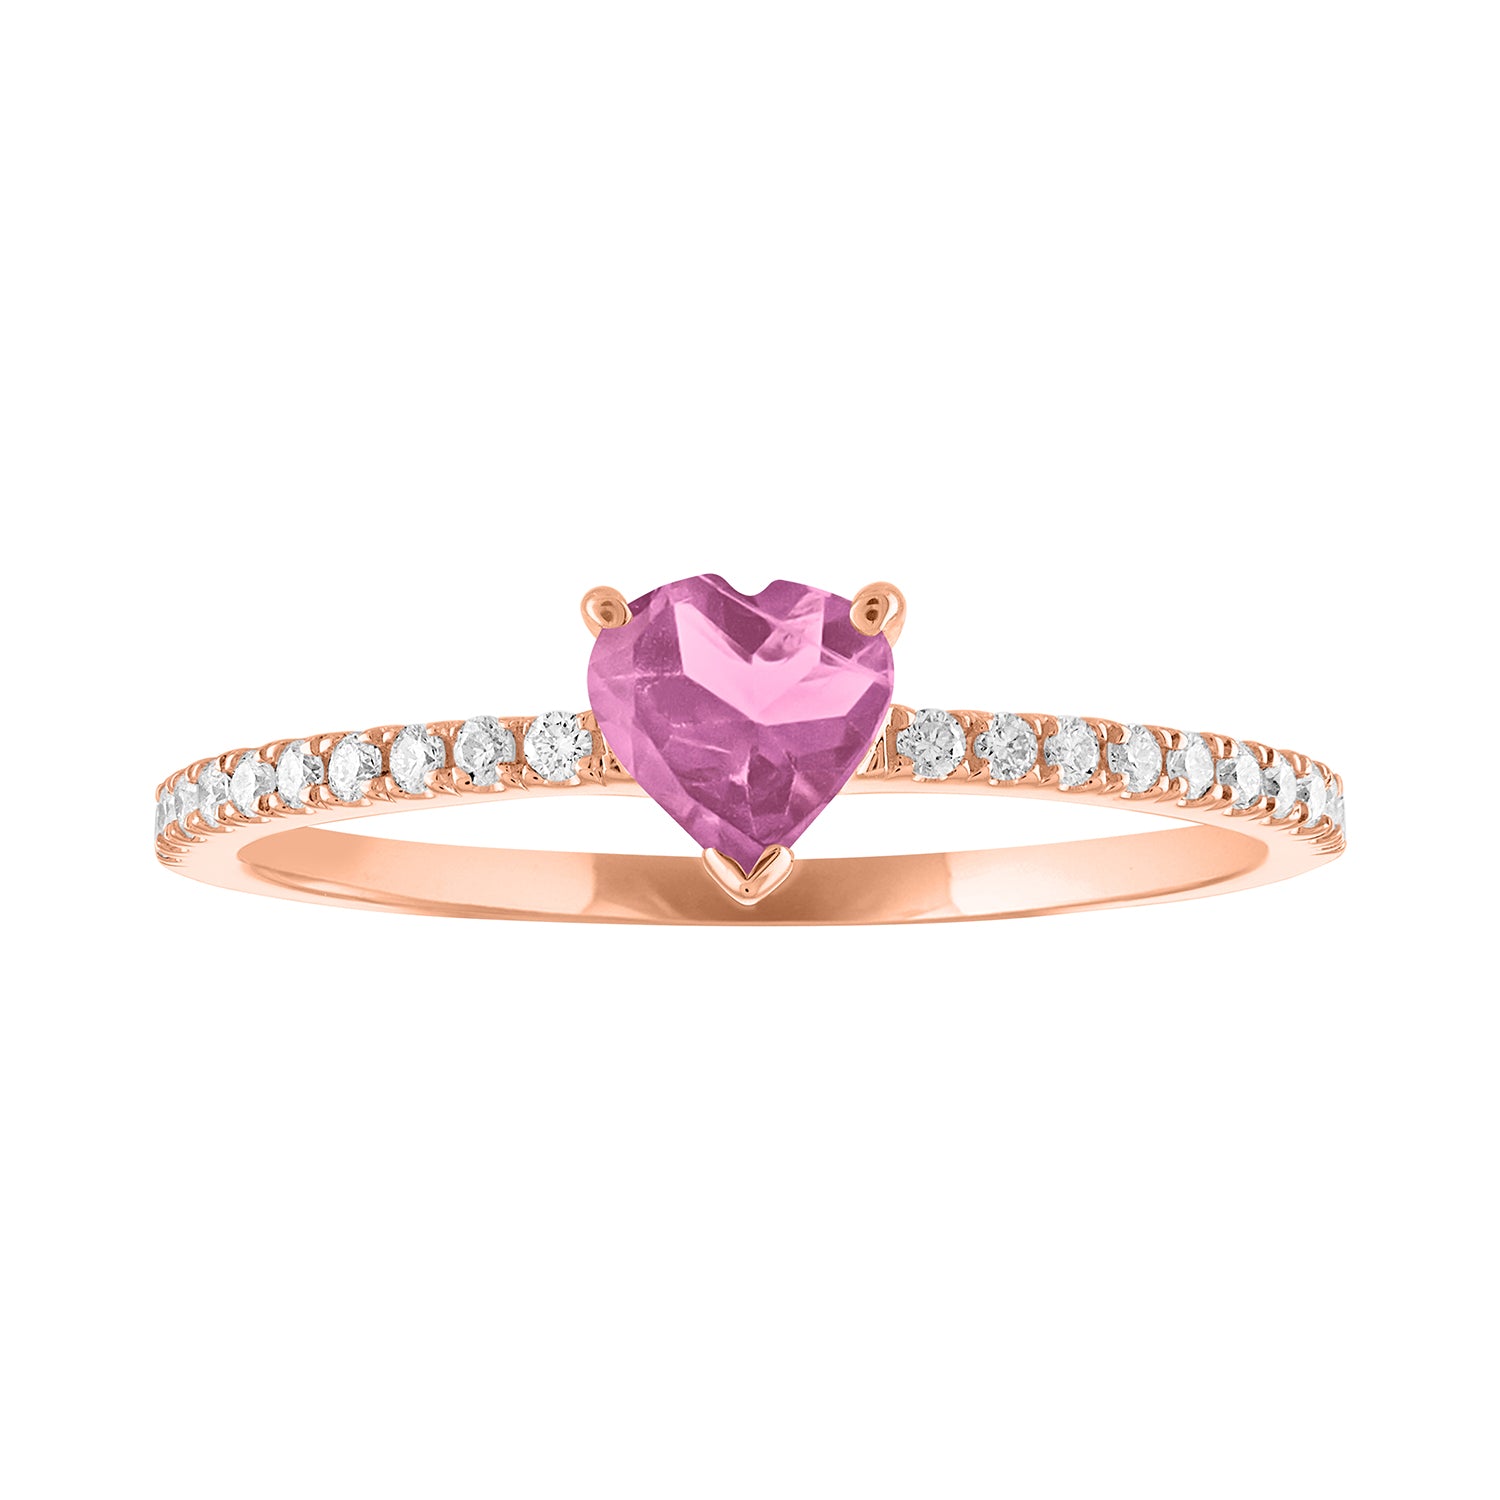 Thin banned rose gold ring with heart shaped pink tourmaline and round diamonds on the shank